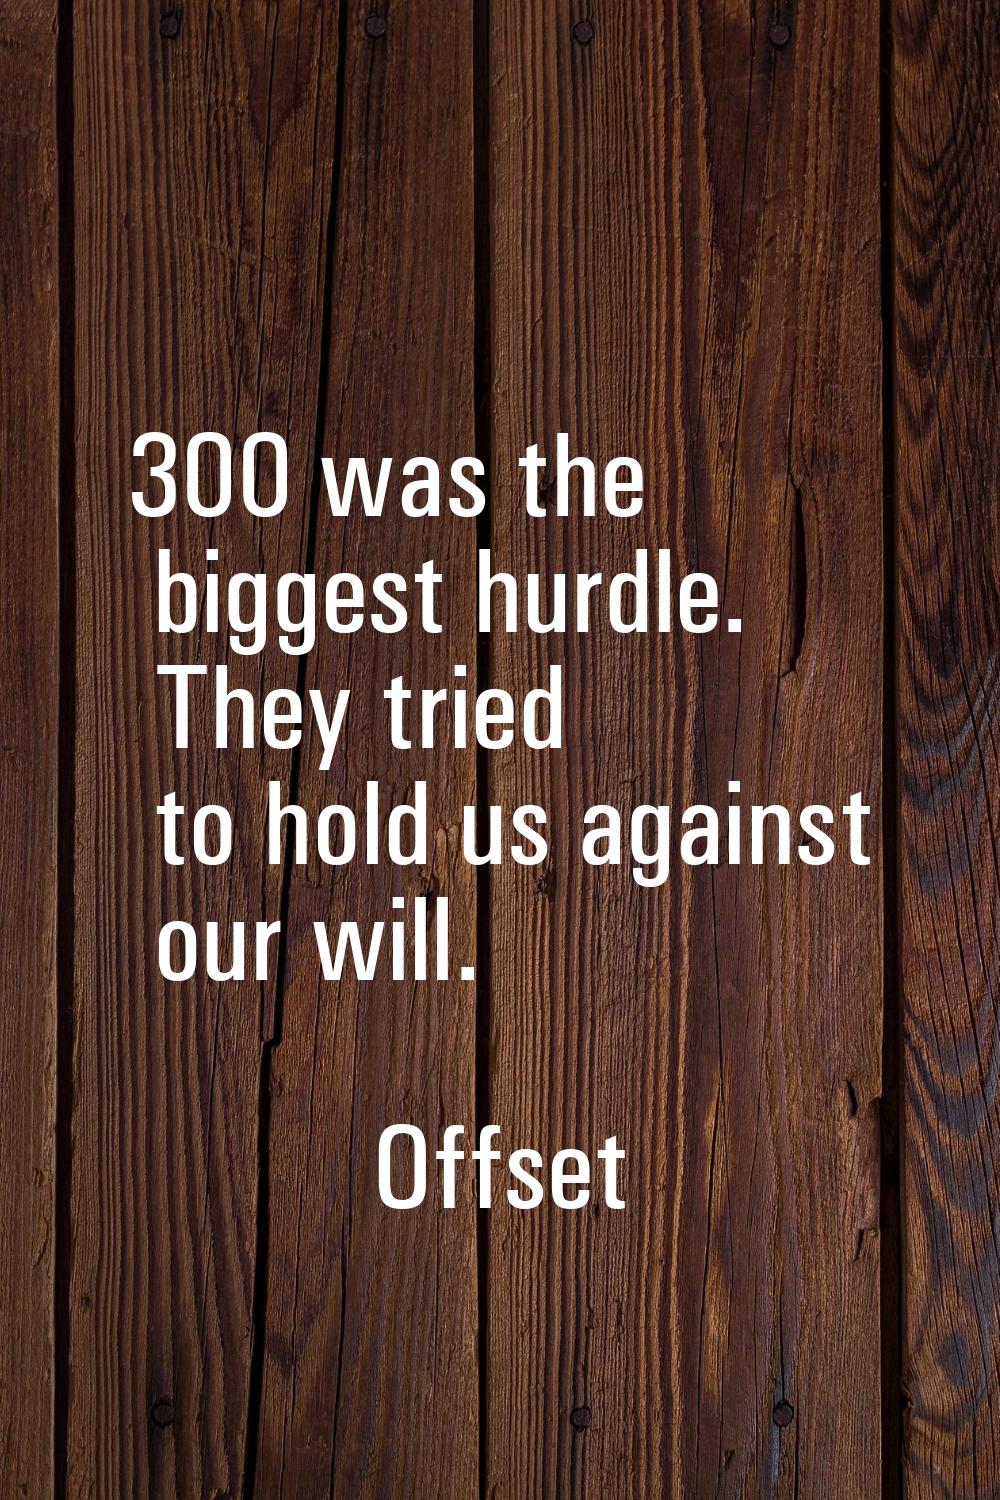 300 was the biggest hurdle. They tried to hold us against our will.